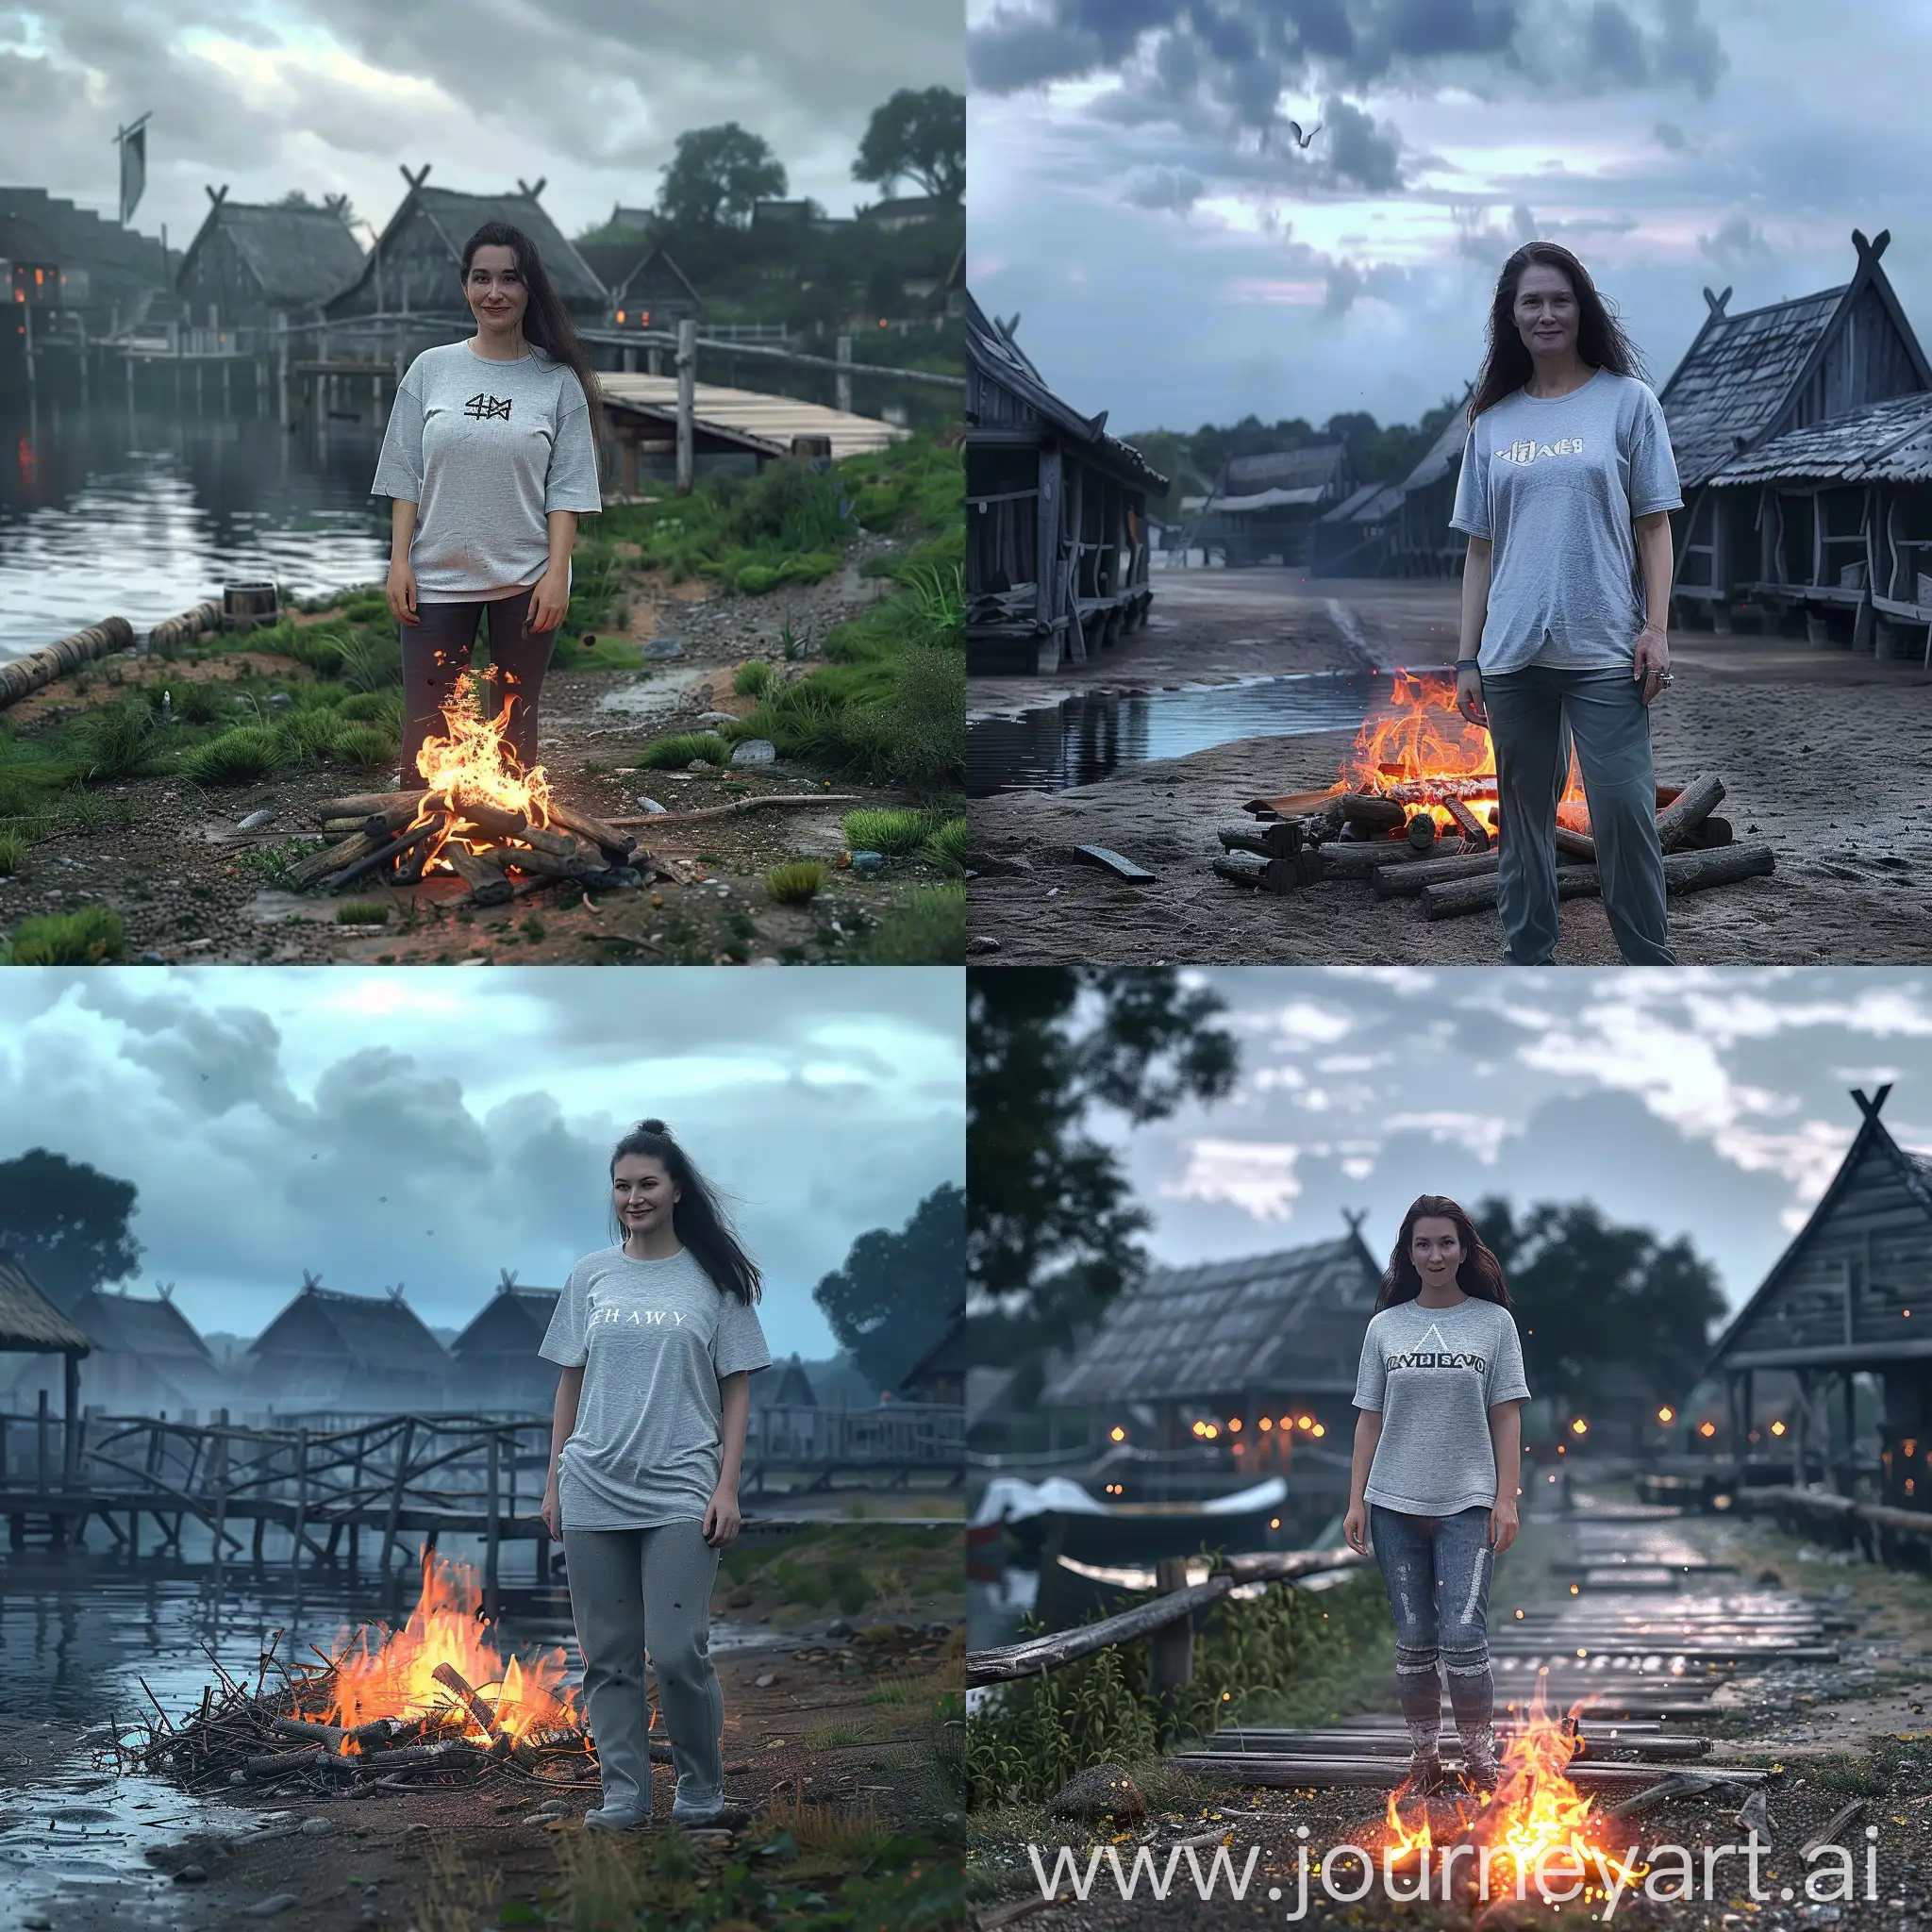 Viking-Village-at-Dusk-with-Fiery-Torches